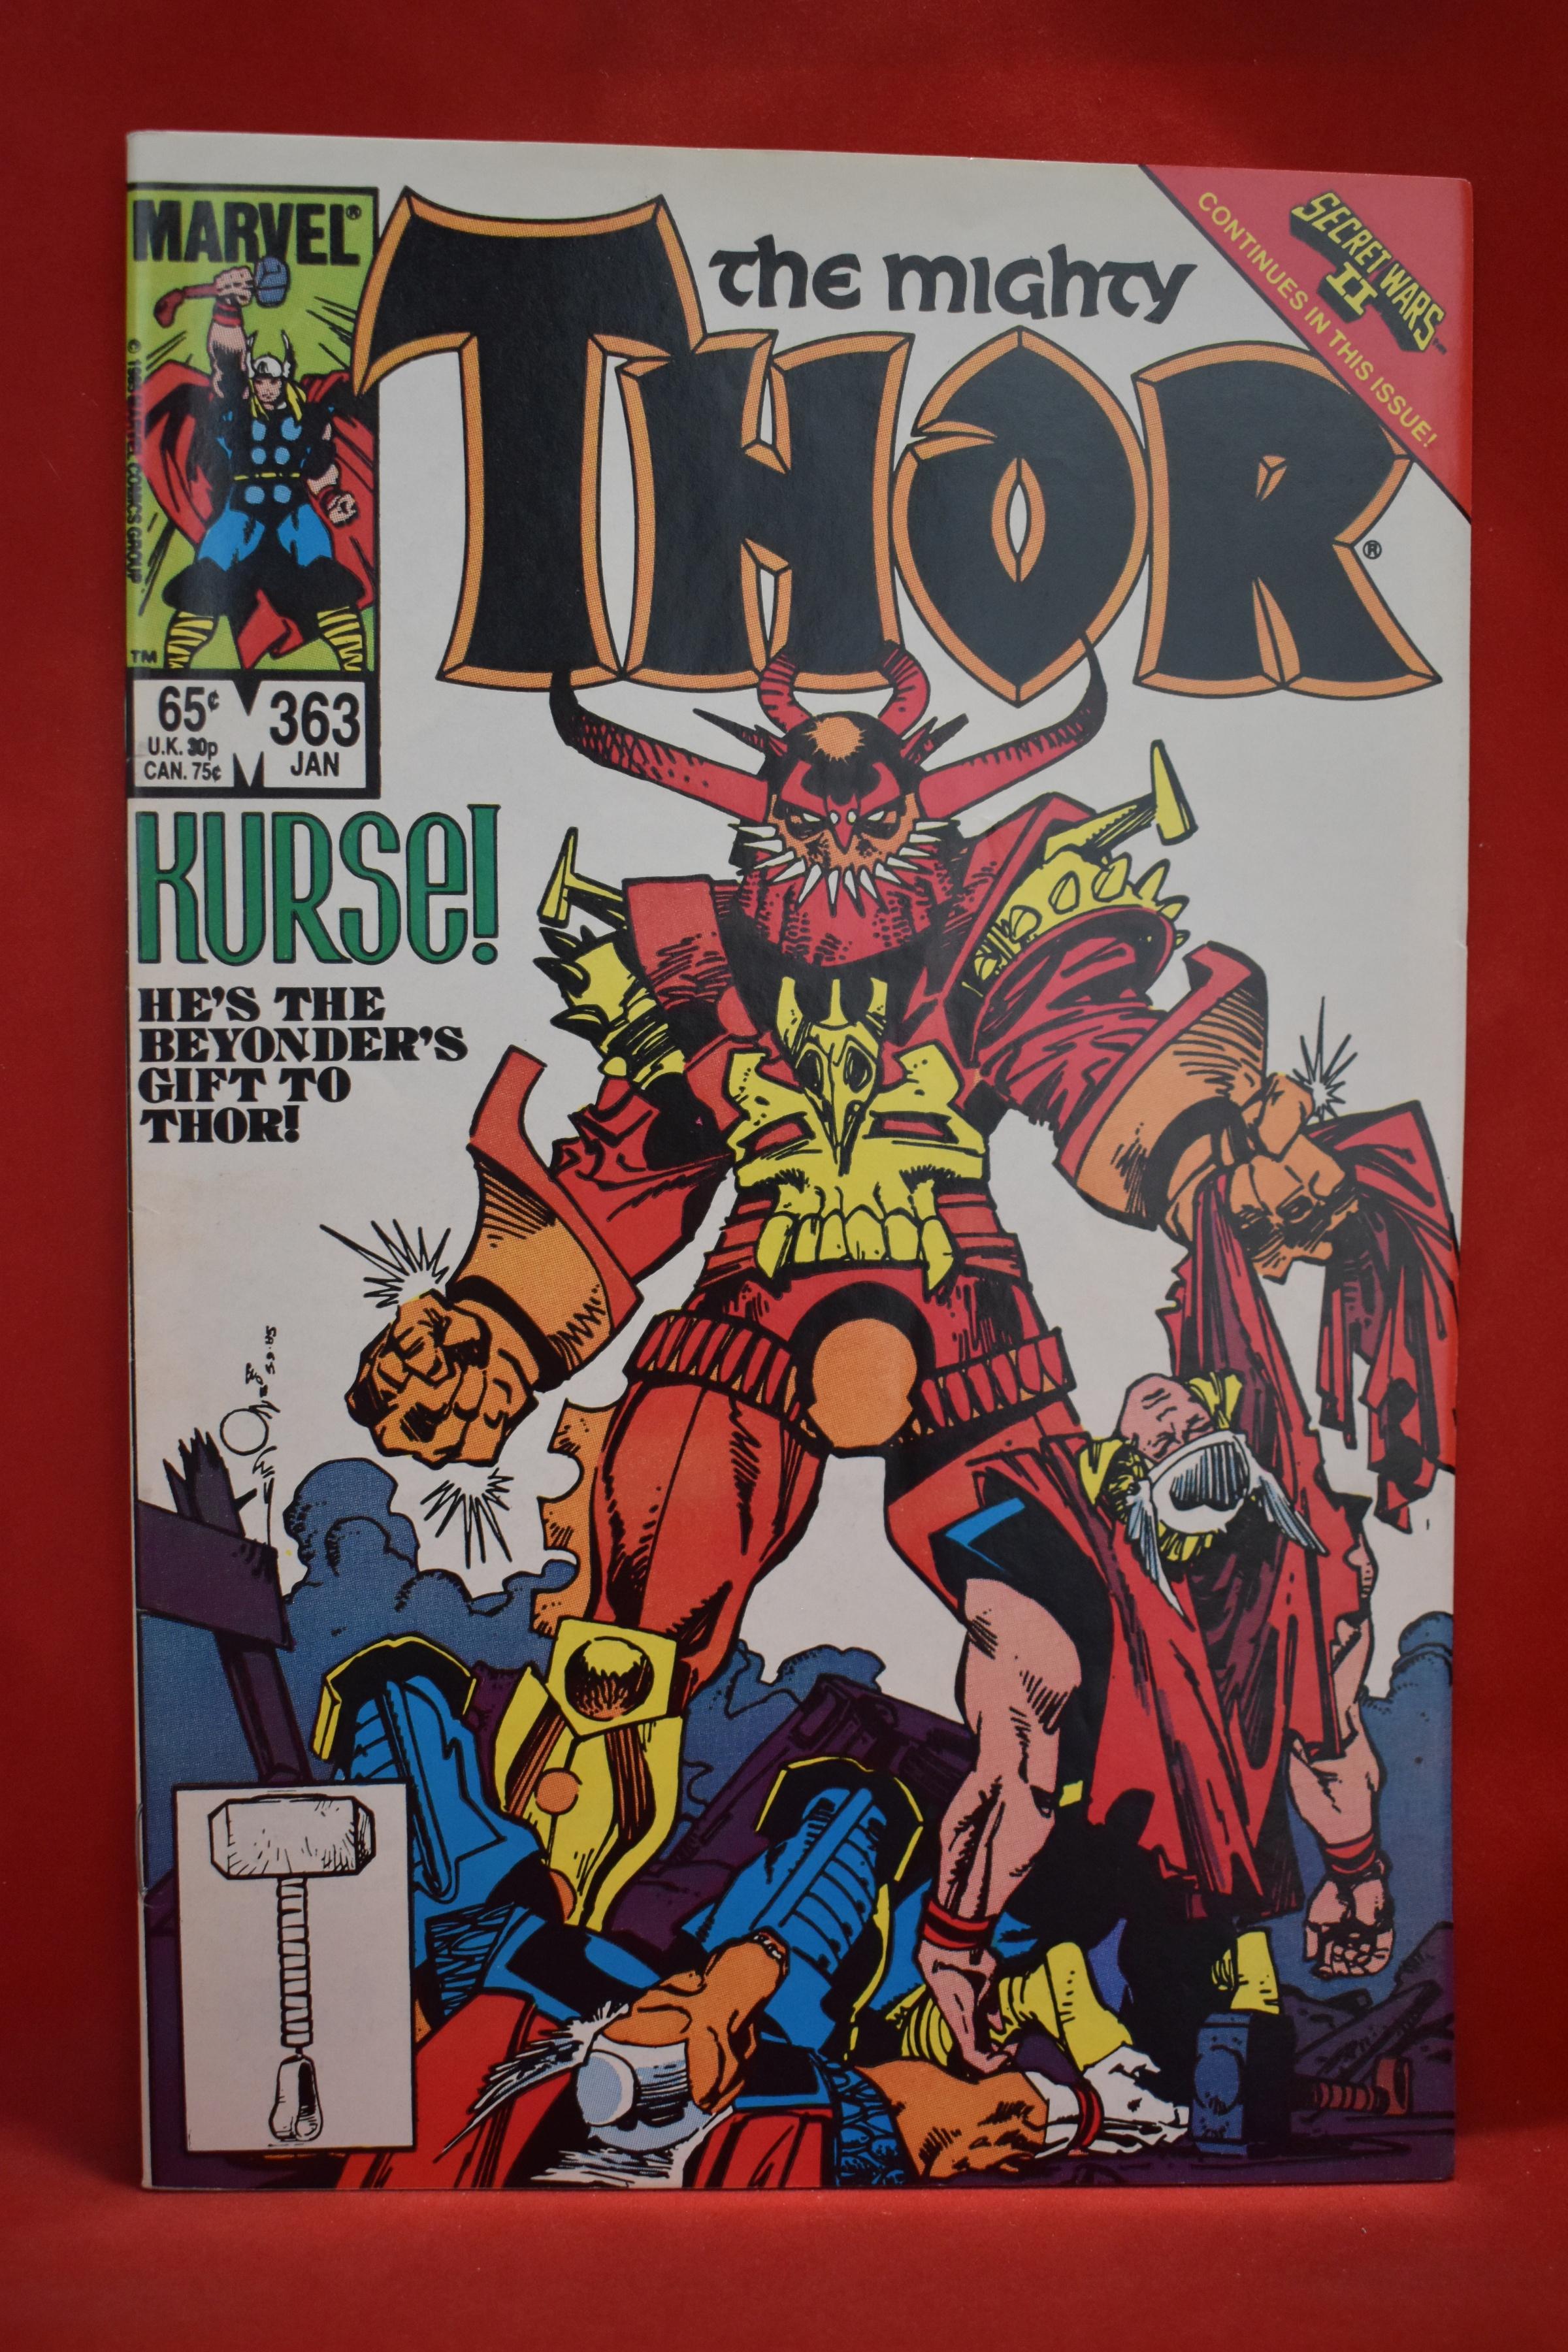 THOR #363 | THOR IS TRANSFORMED INTO A FROG!